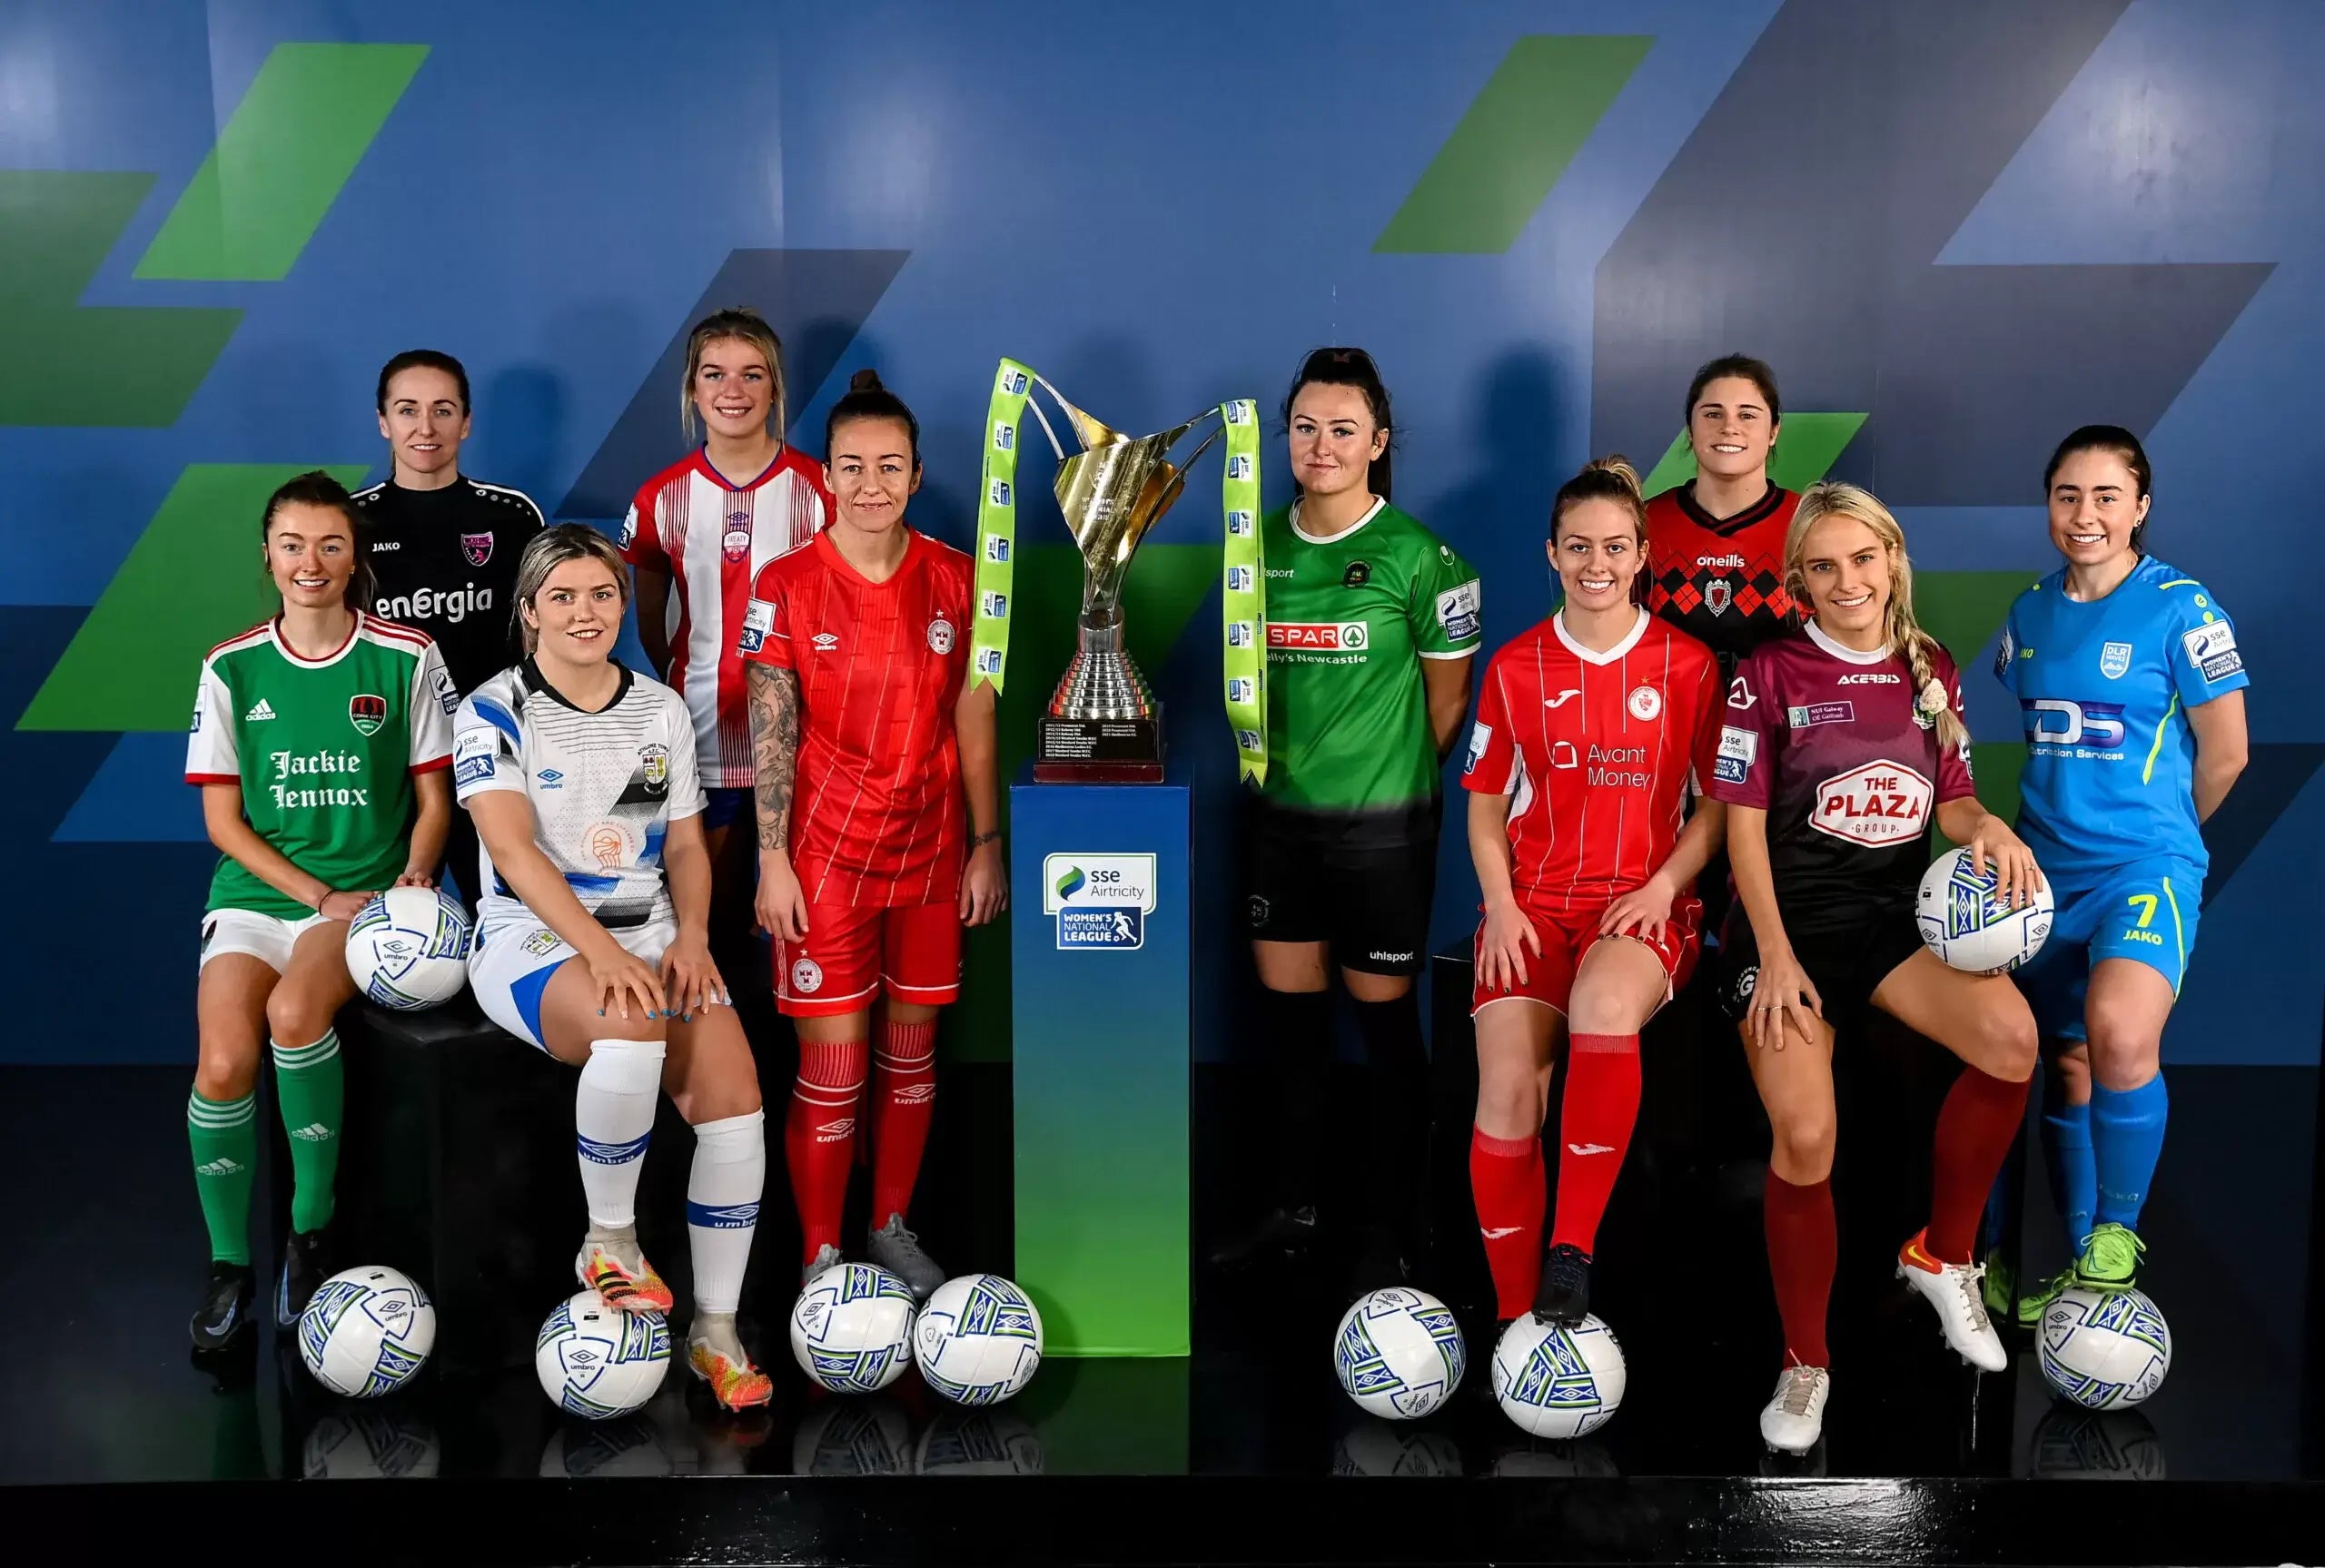 WNL Kicks Off This Weekend